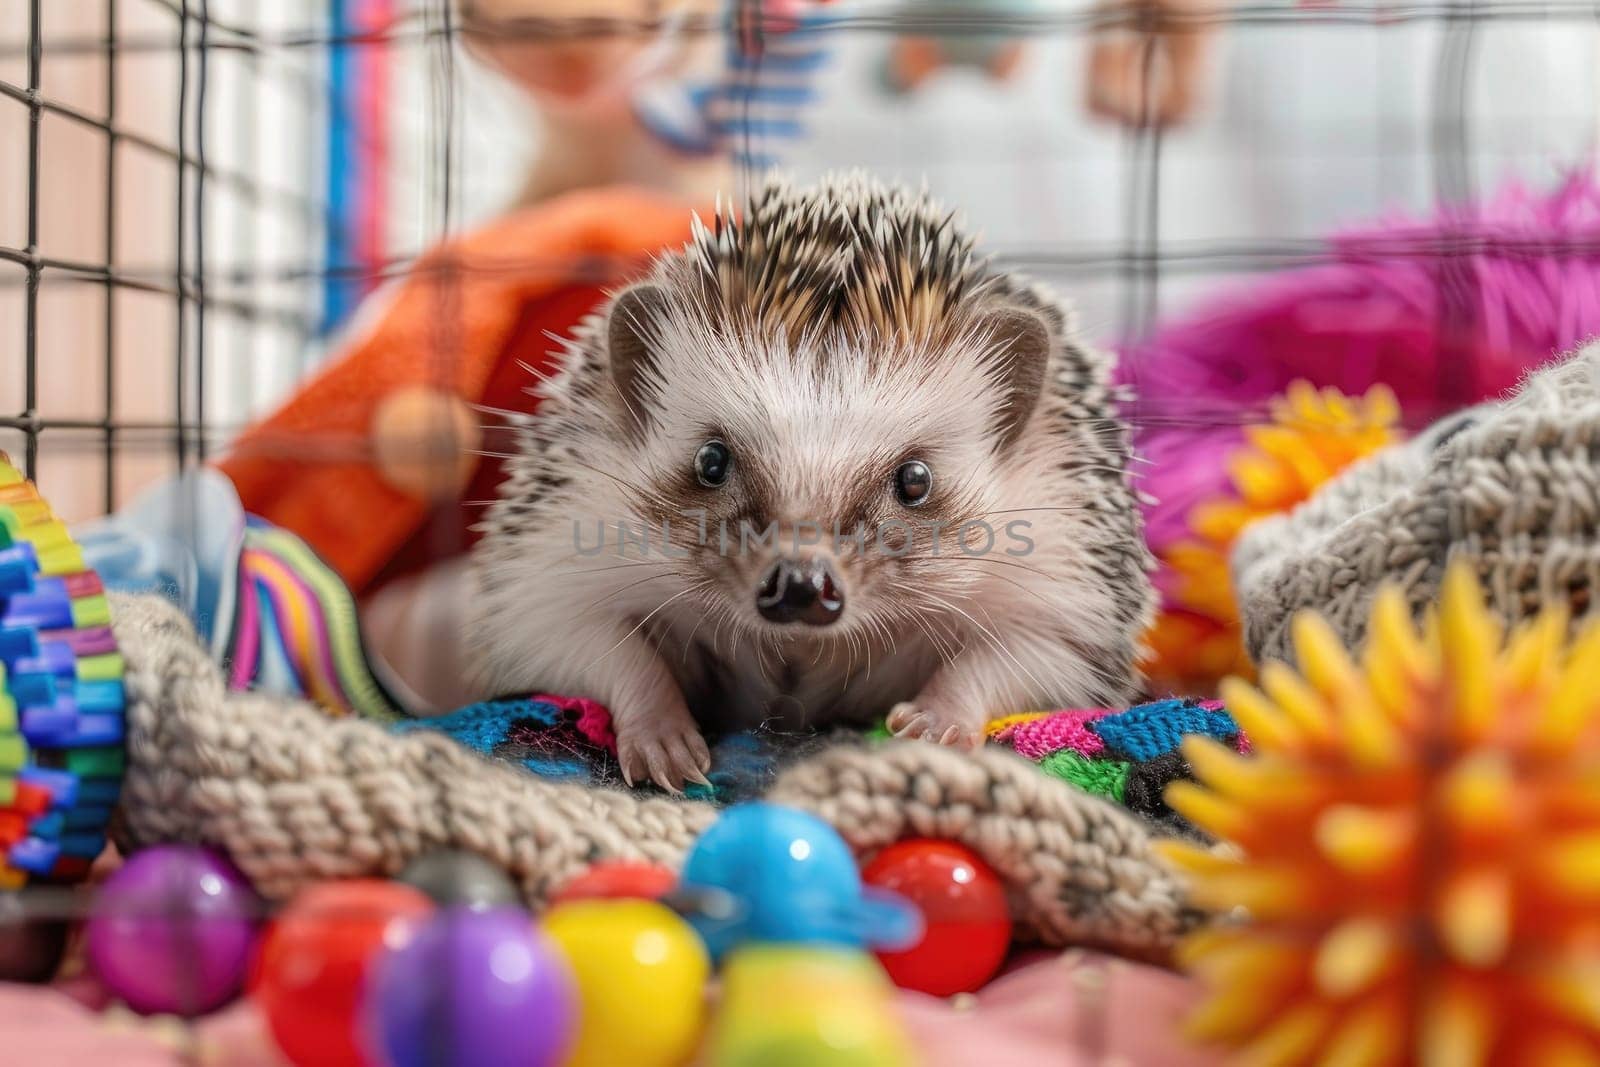 A happy hedgehog uncurled and exploring its playpen, filled with colorful toys and